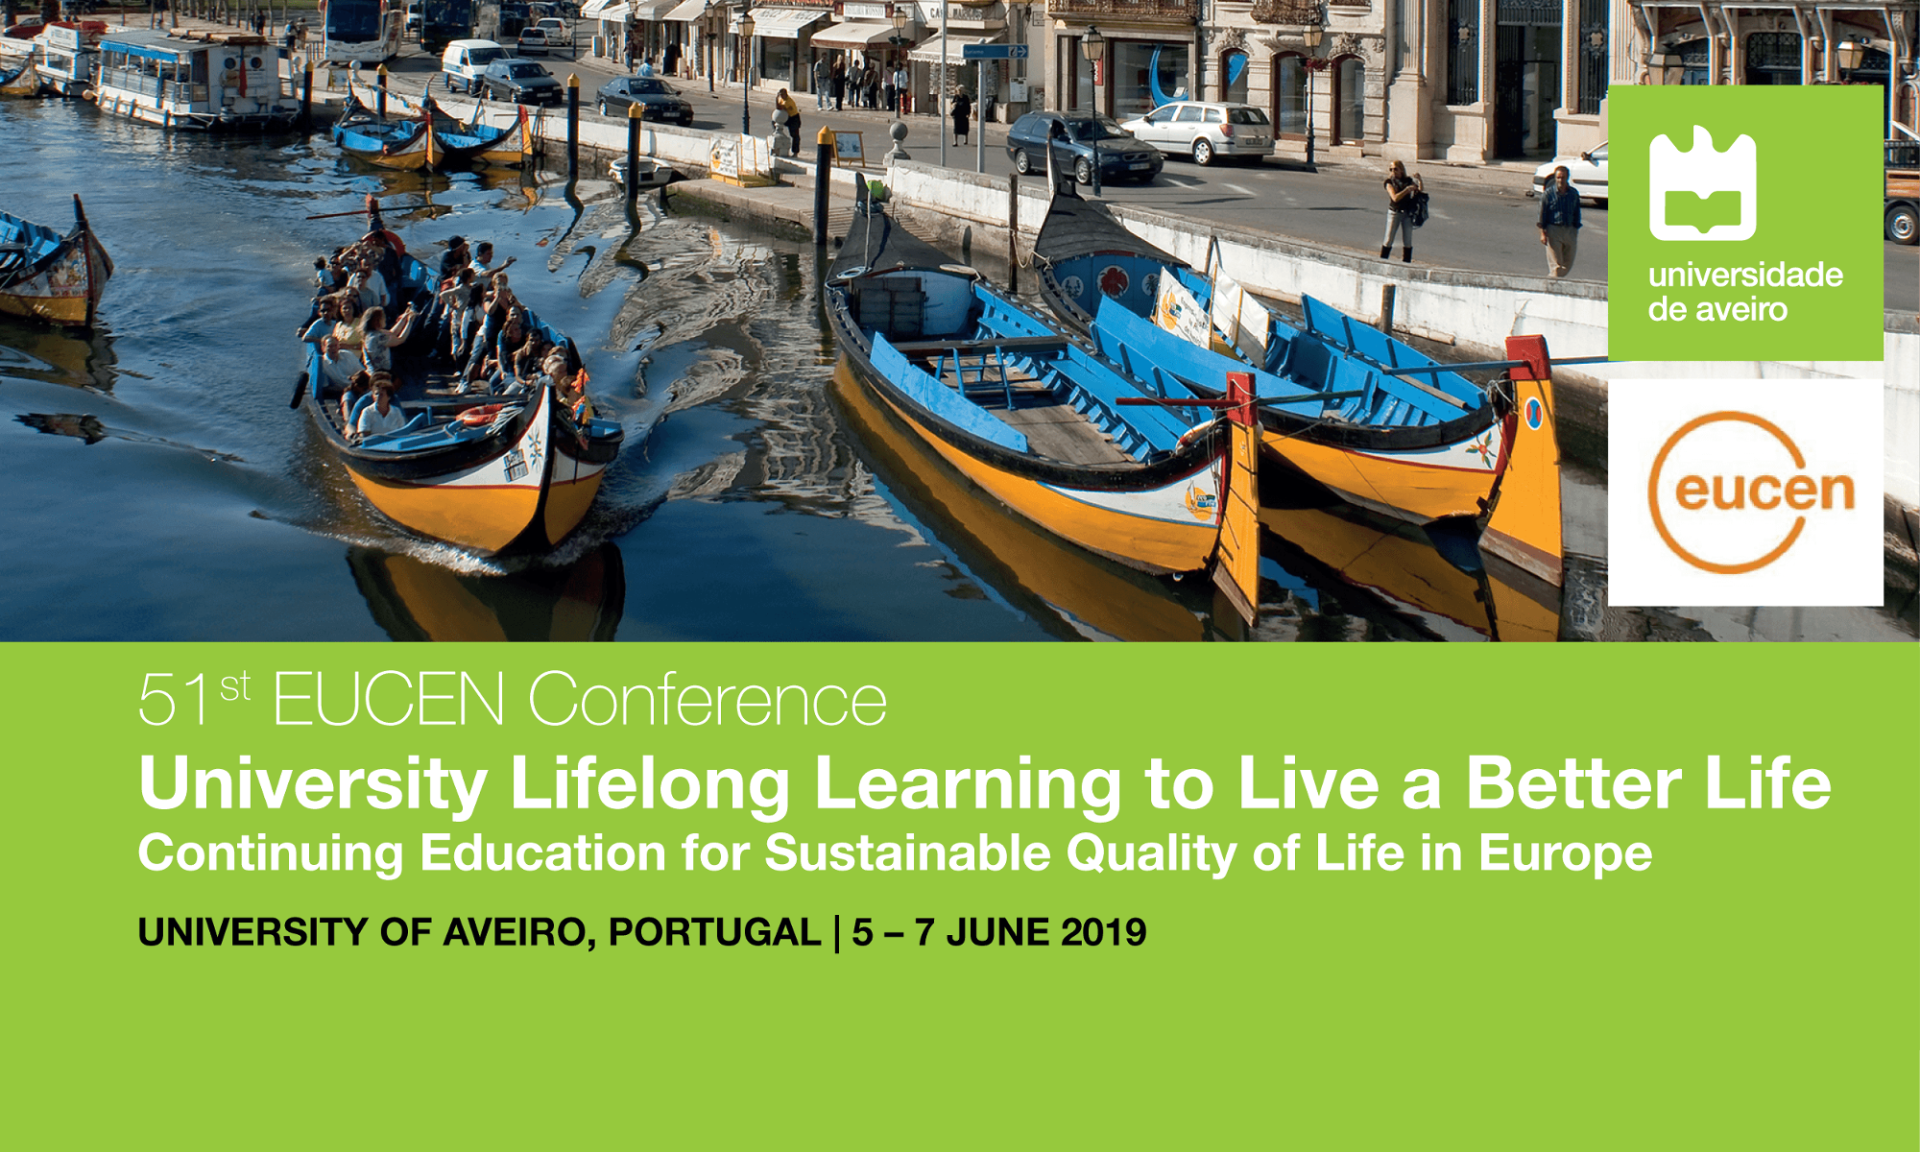 51st eucen Conference: University Lifelong Learning to Live a Better Life